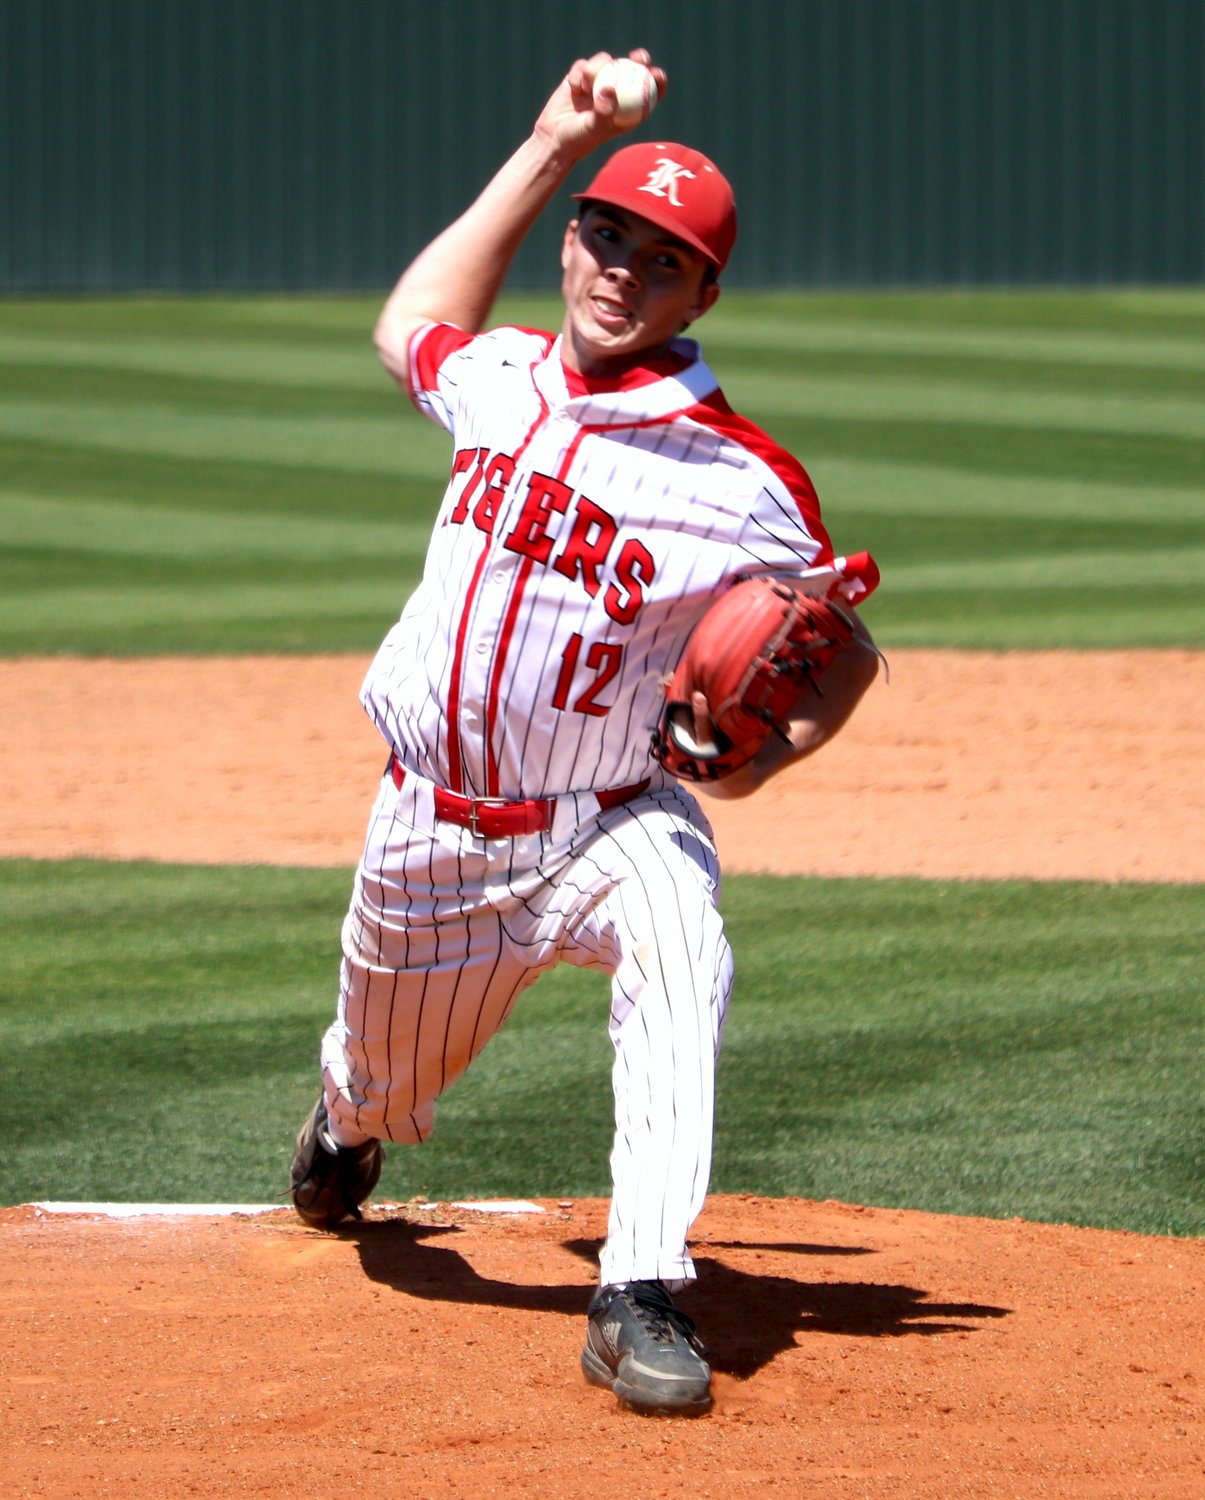 Lucas Moore pitches during Friday’s game between Katy and Cinco Ranch at the Katy baseball field.